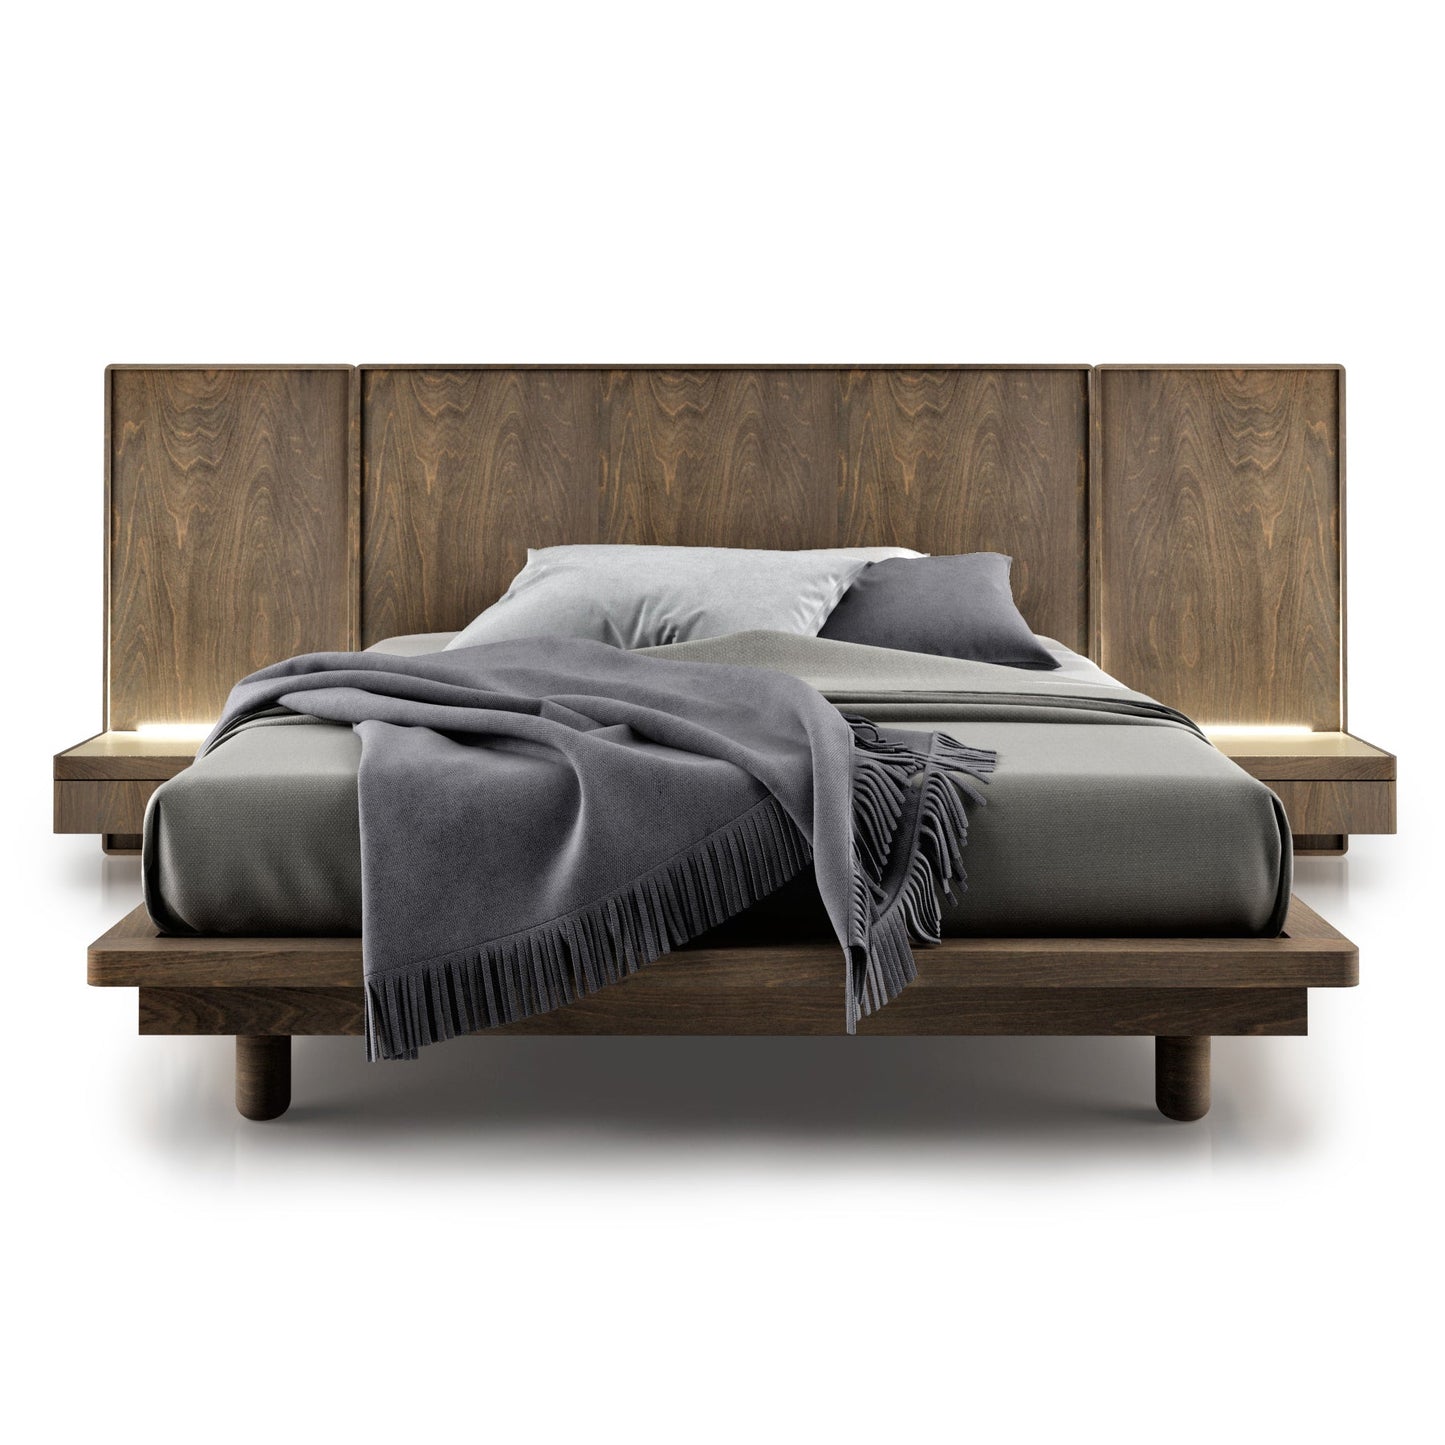 Surface Bed with Extendable Headboard